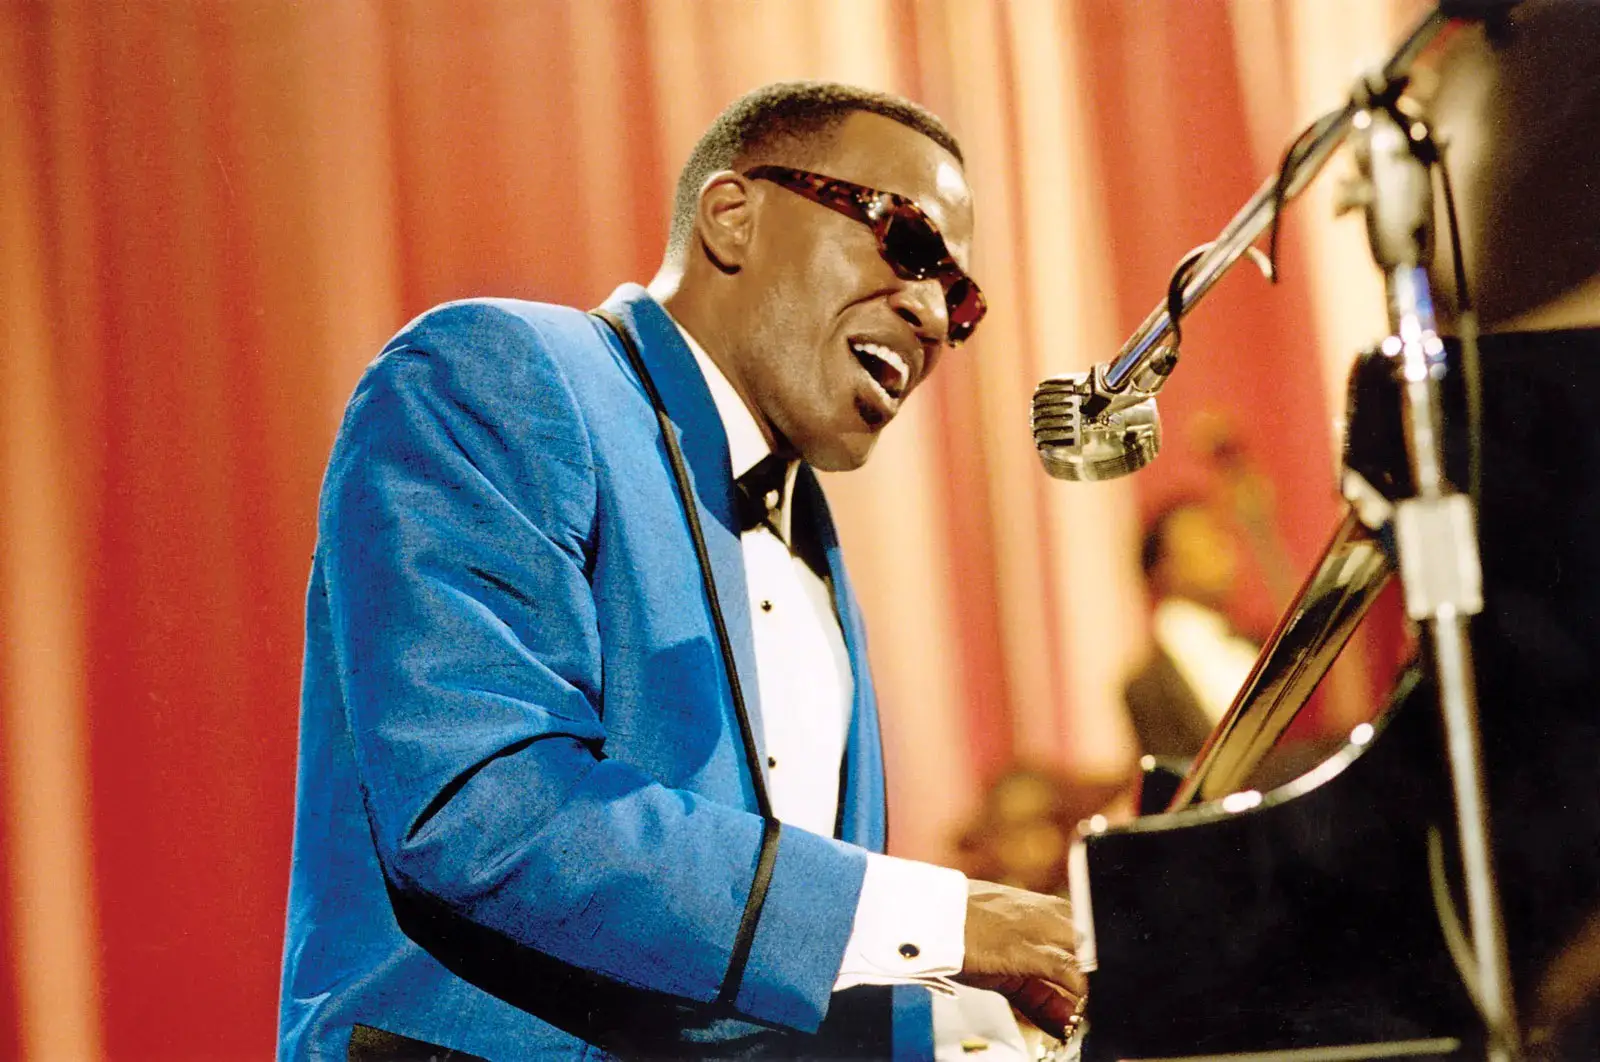 Jamie Foxx as Ray Charles in "Ray"